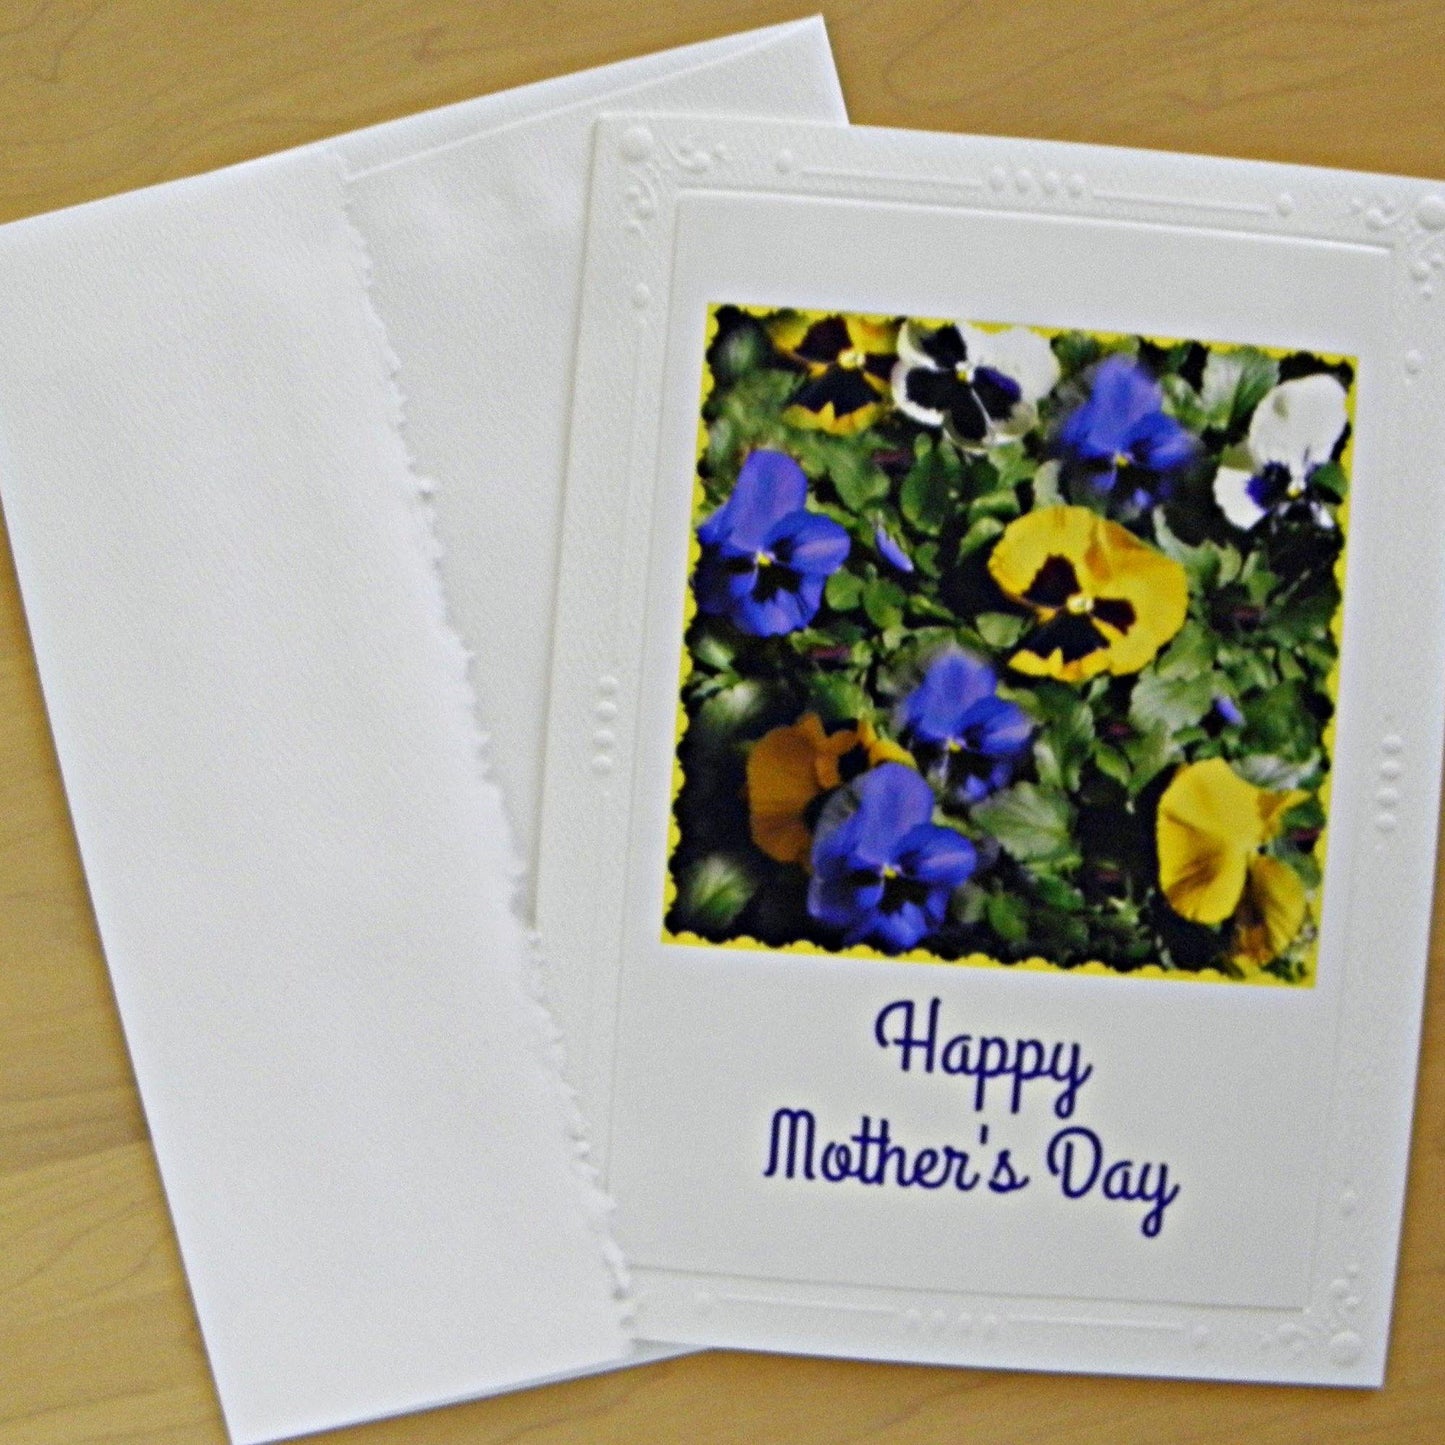 Front view of the card and envelope